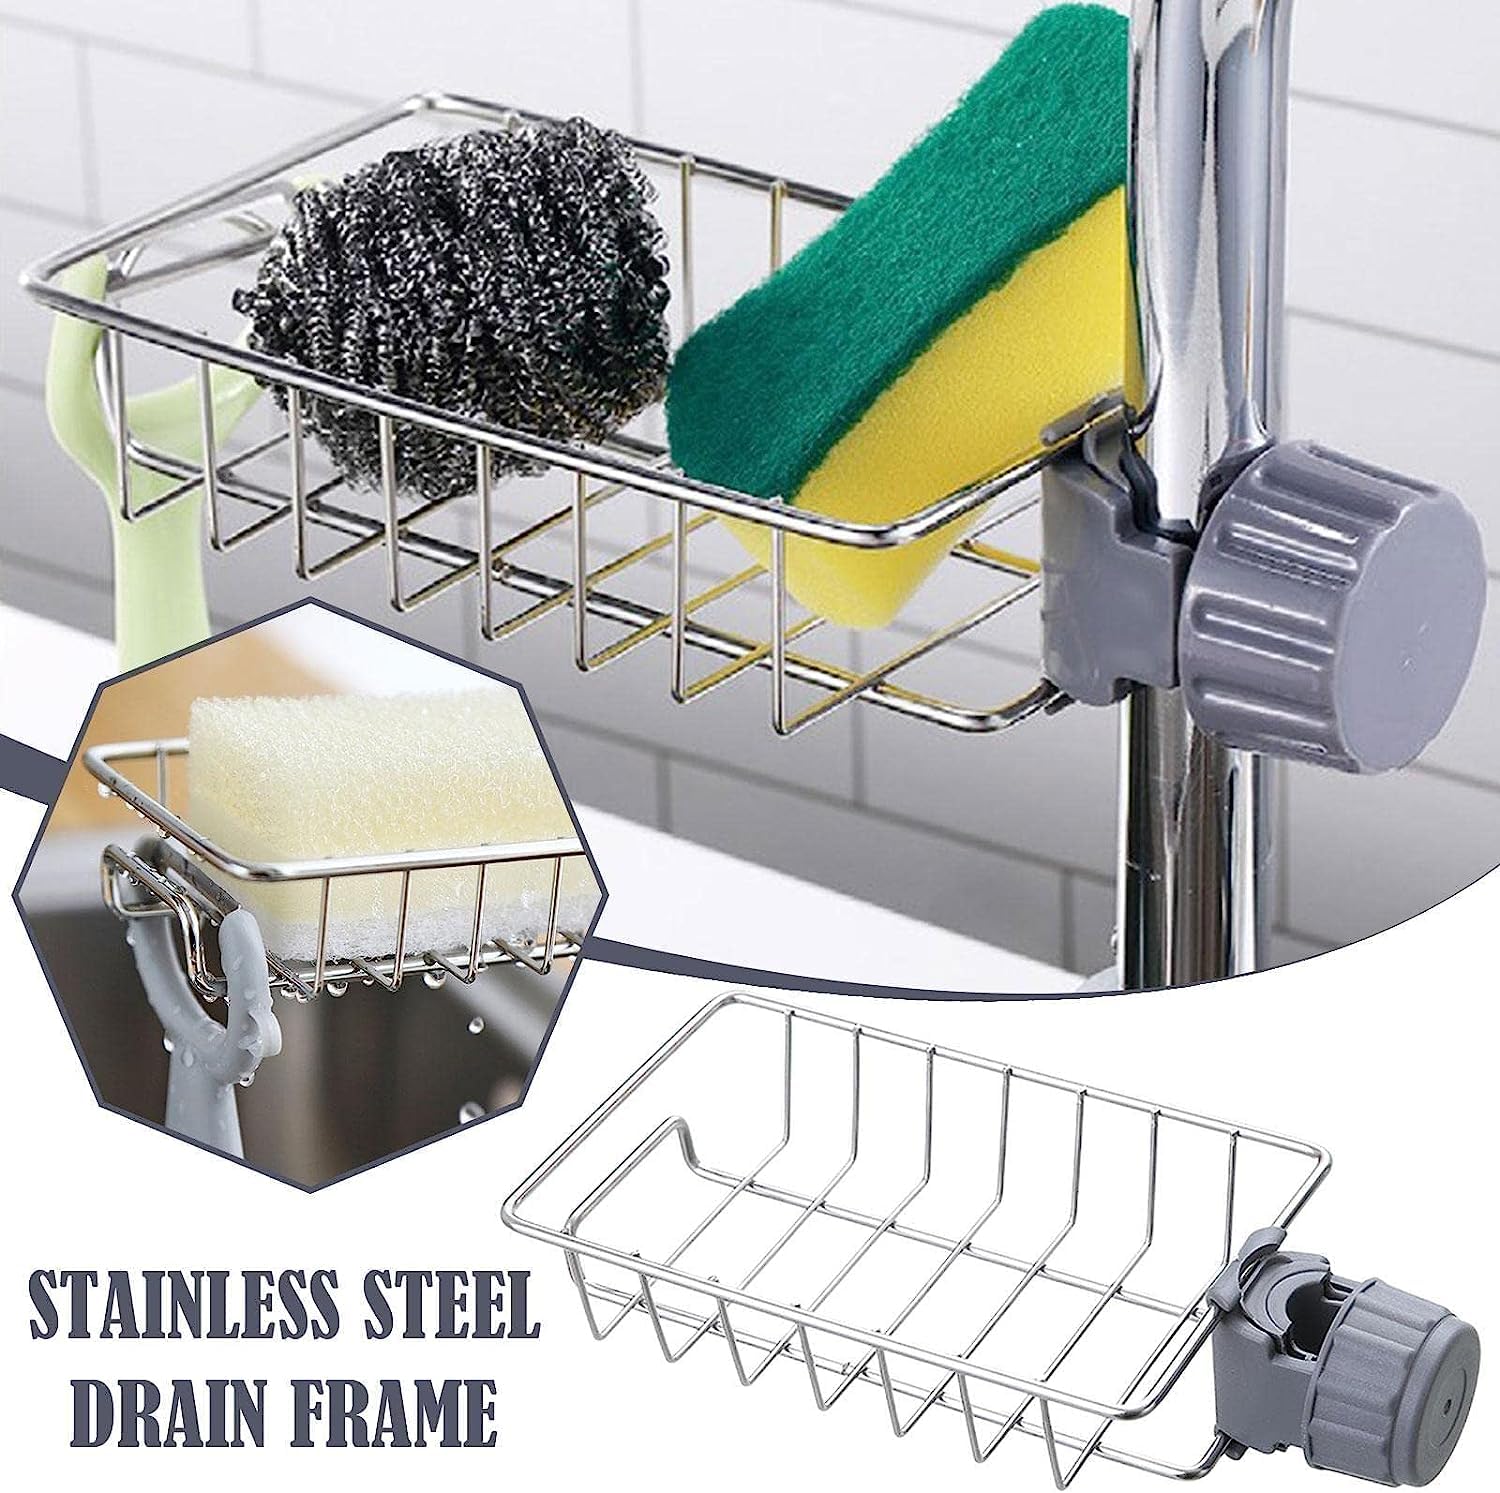 Kitchen Sink Caddy Organizer Over Faucet Sponge Holder, Stainless Steel Heavy Duty Thickening Hanging Faucet Drain Rack for Scrubbers, Soap, Bathroom, Detachable No Suction Cup or Magnet (Faucet Rack)